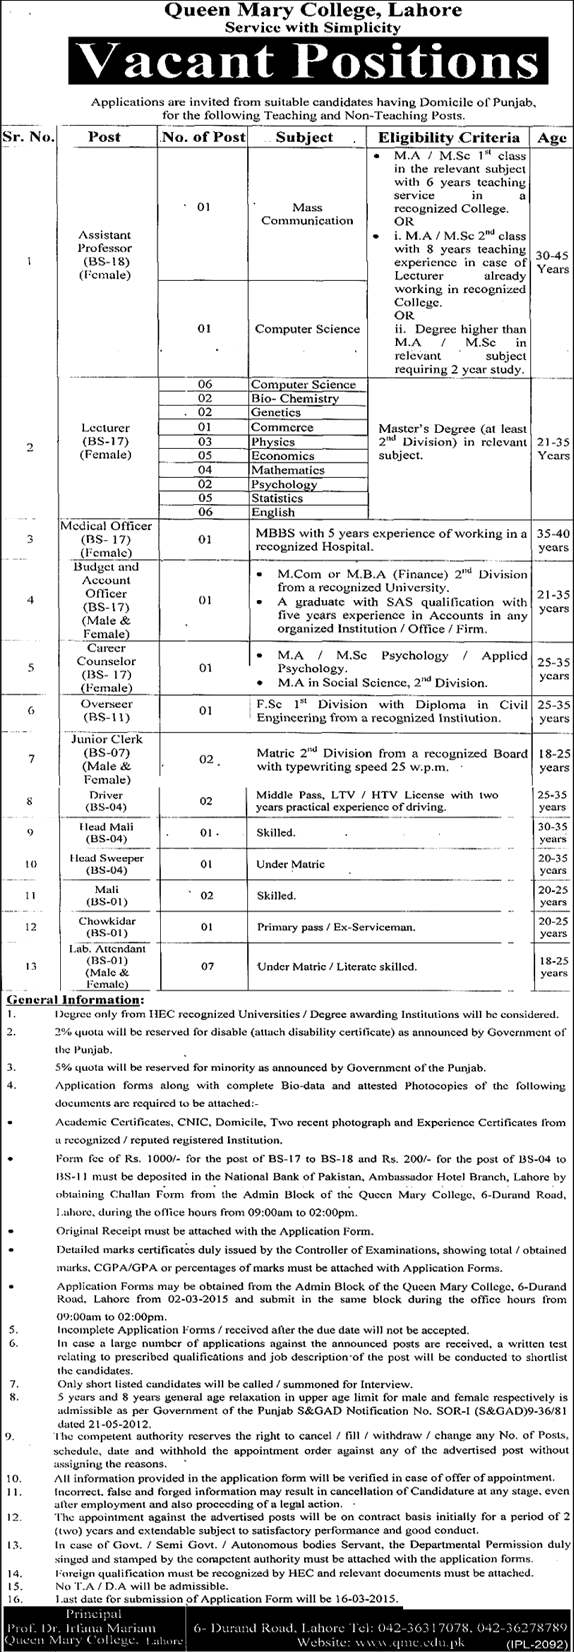 Queen Mary College Lahore Jobs 2015 February Teaching Faculty, Admin & Support Staff Latest